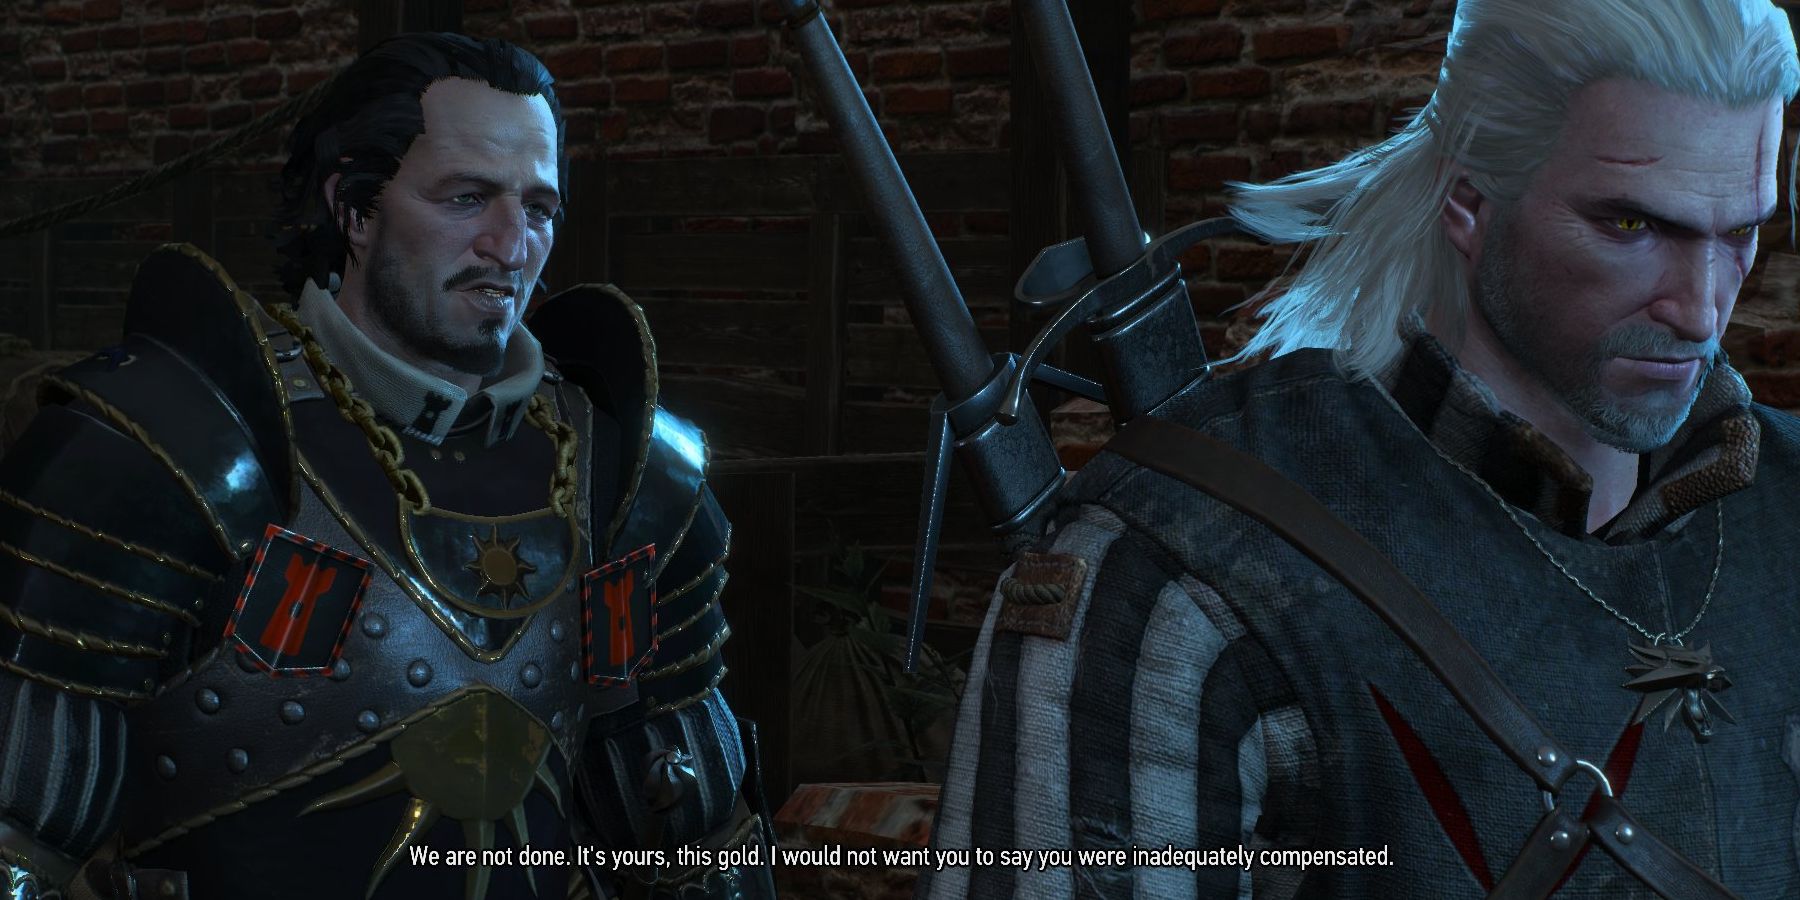 The Witcher 3 the captain offers Geralt pay for his efforts